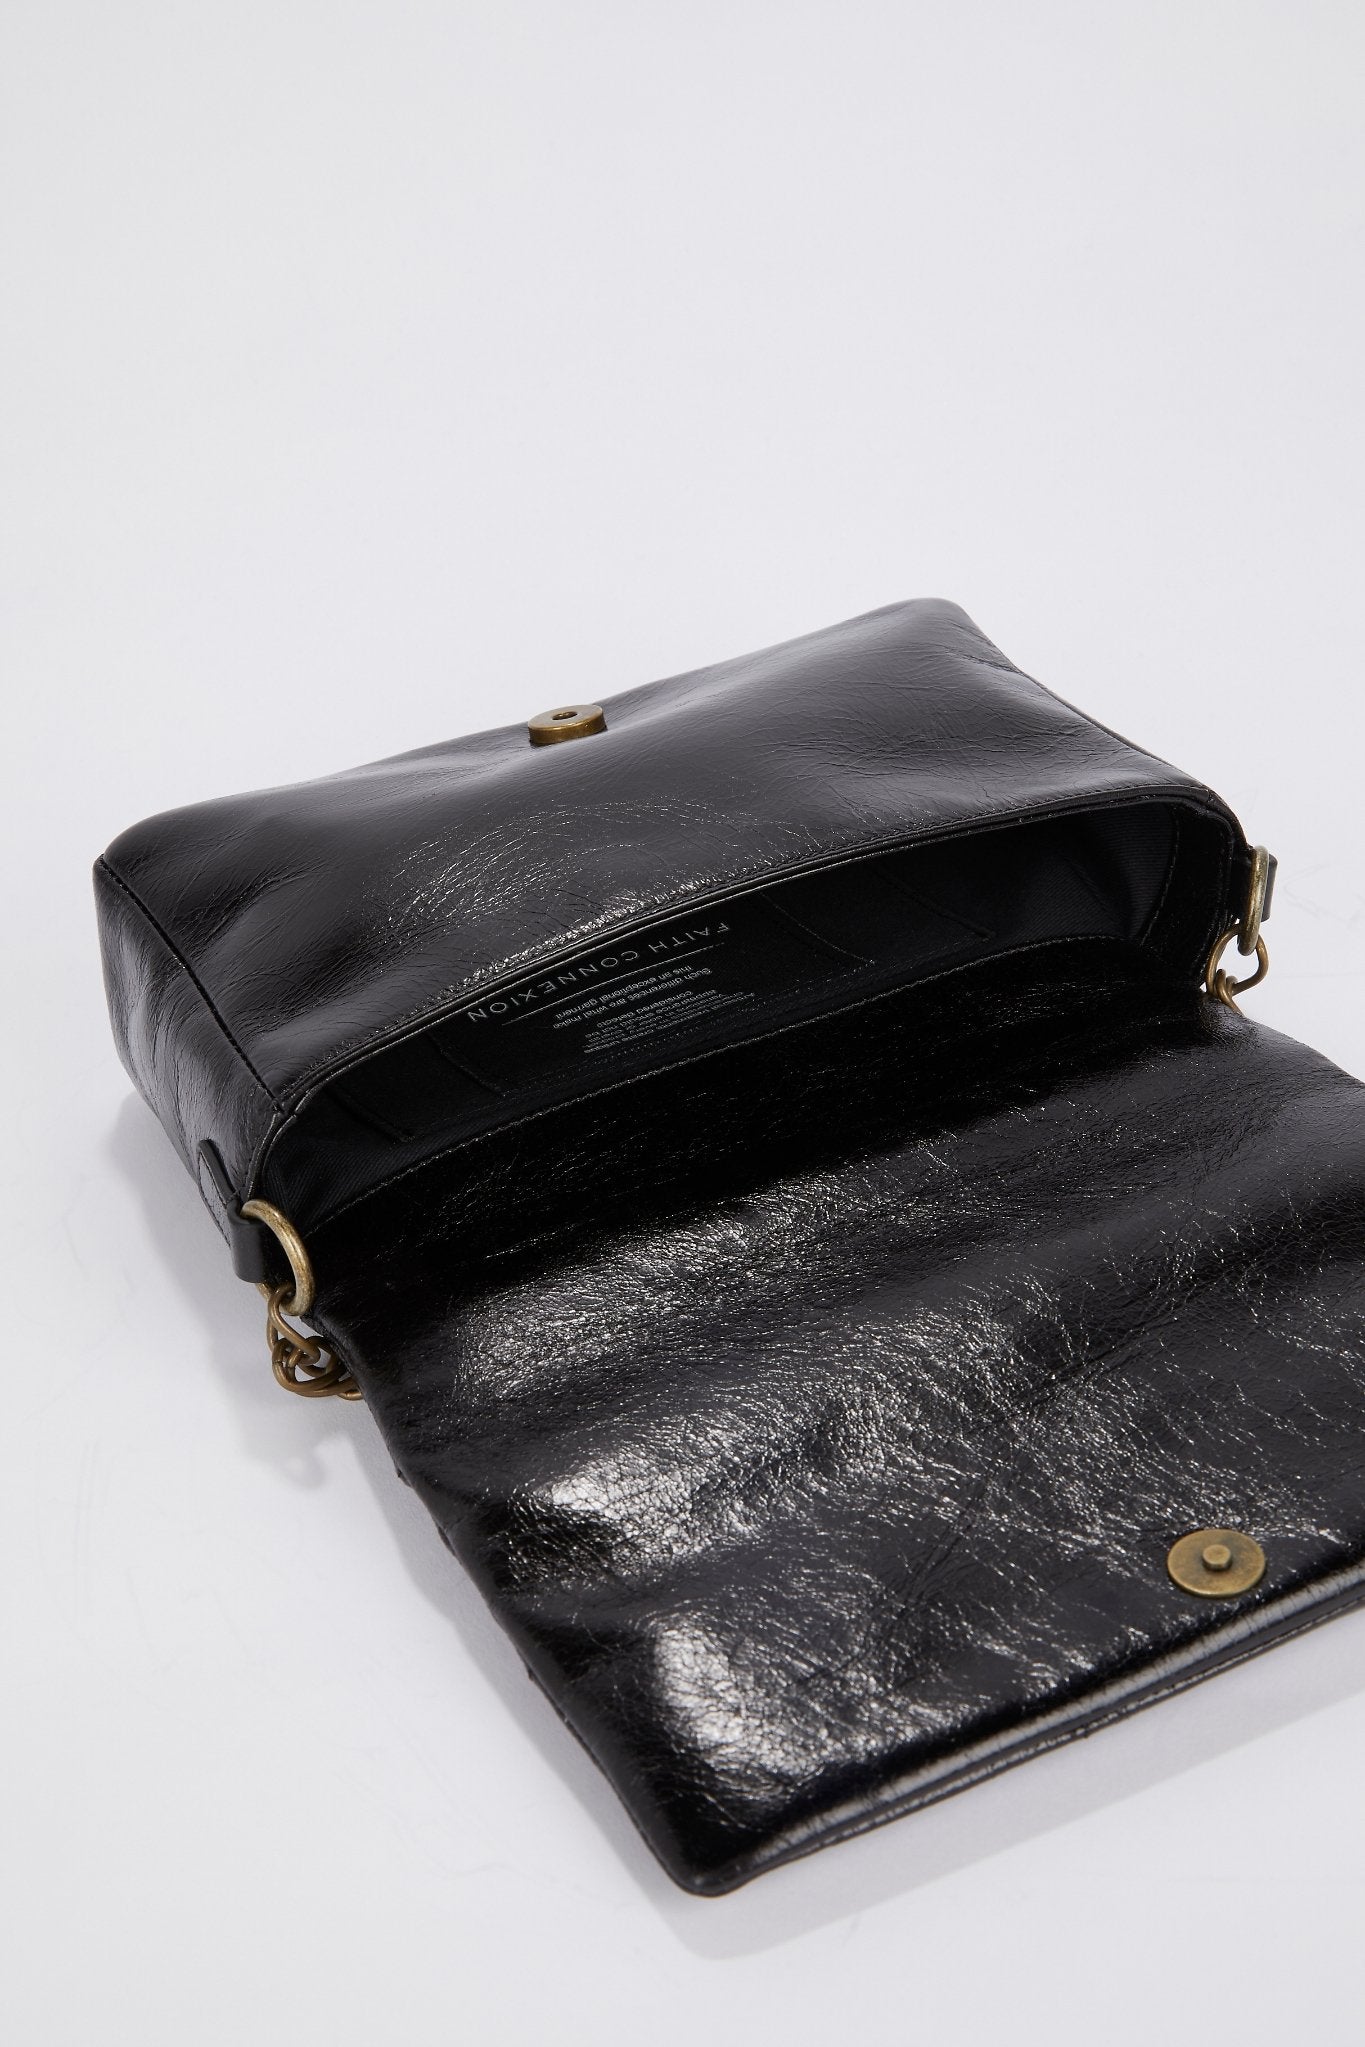 Black Quilted Clutch Bag